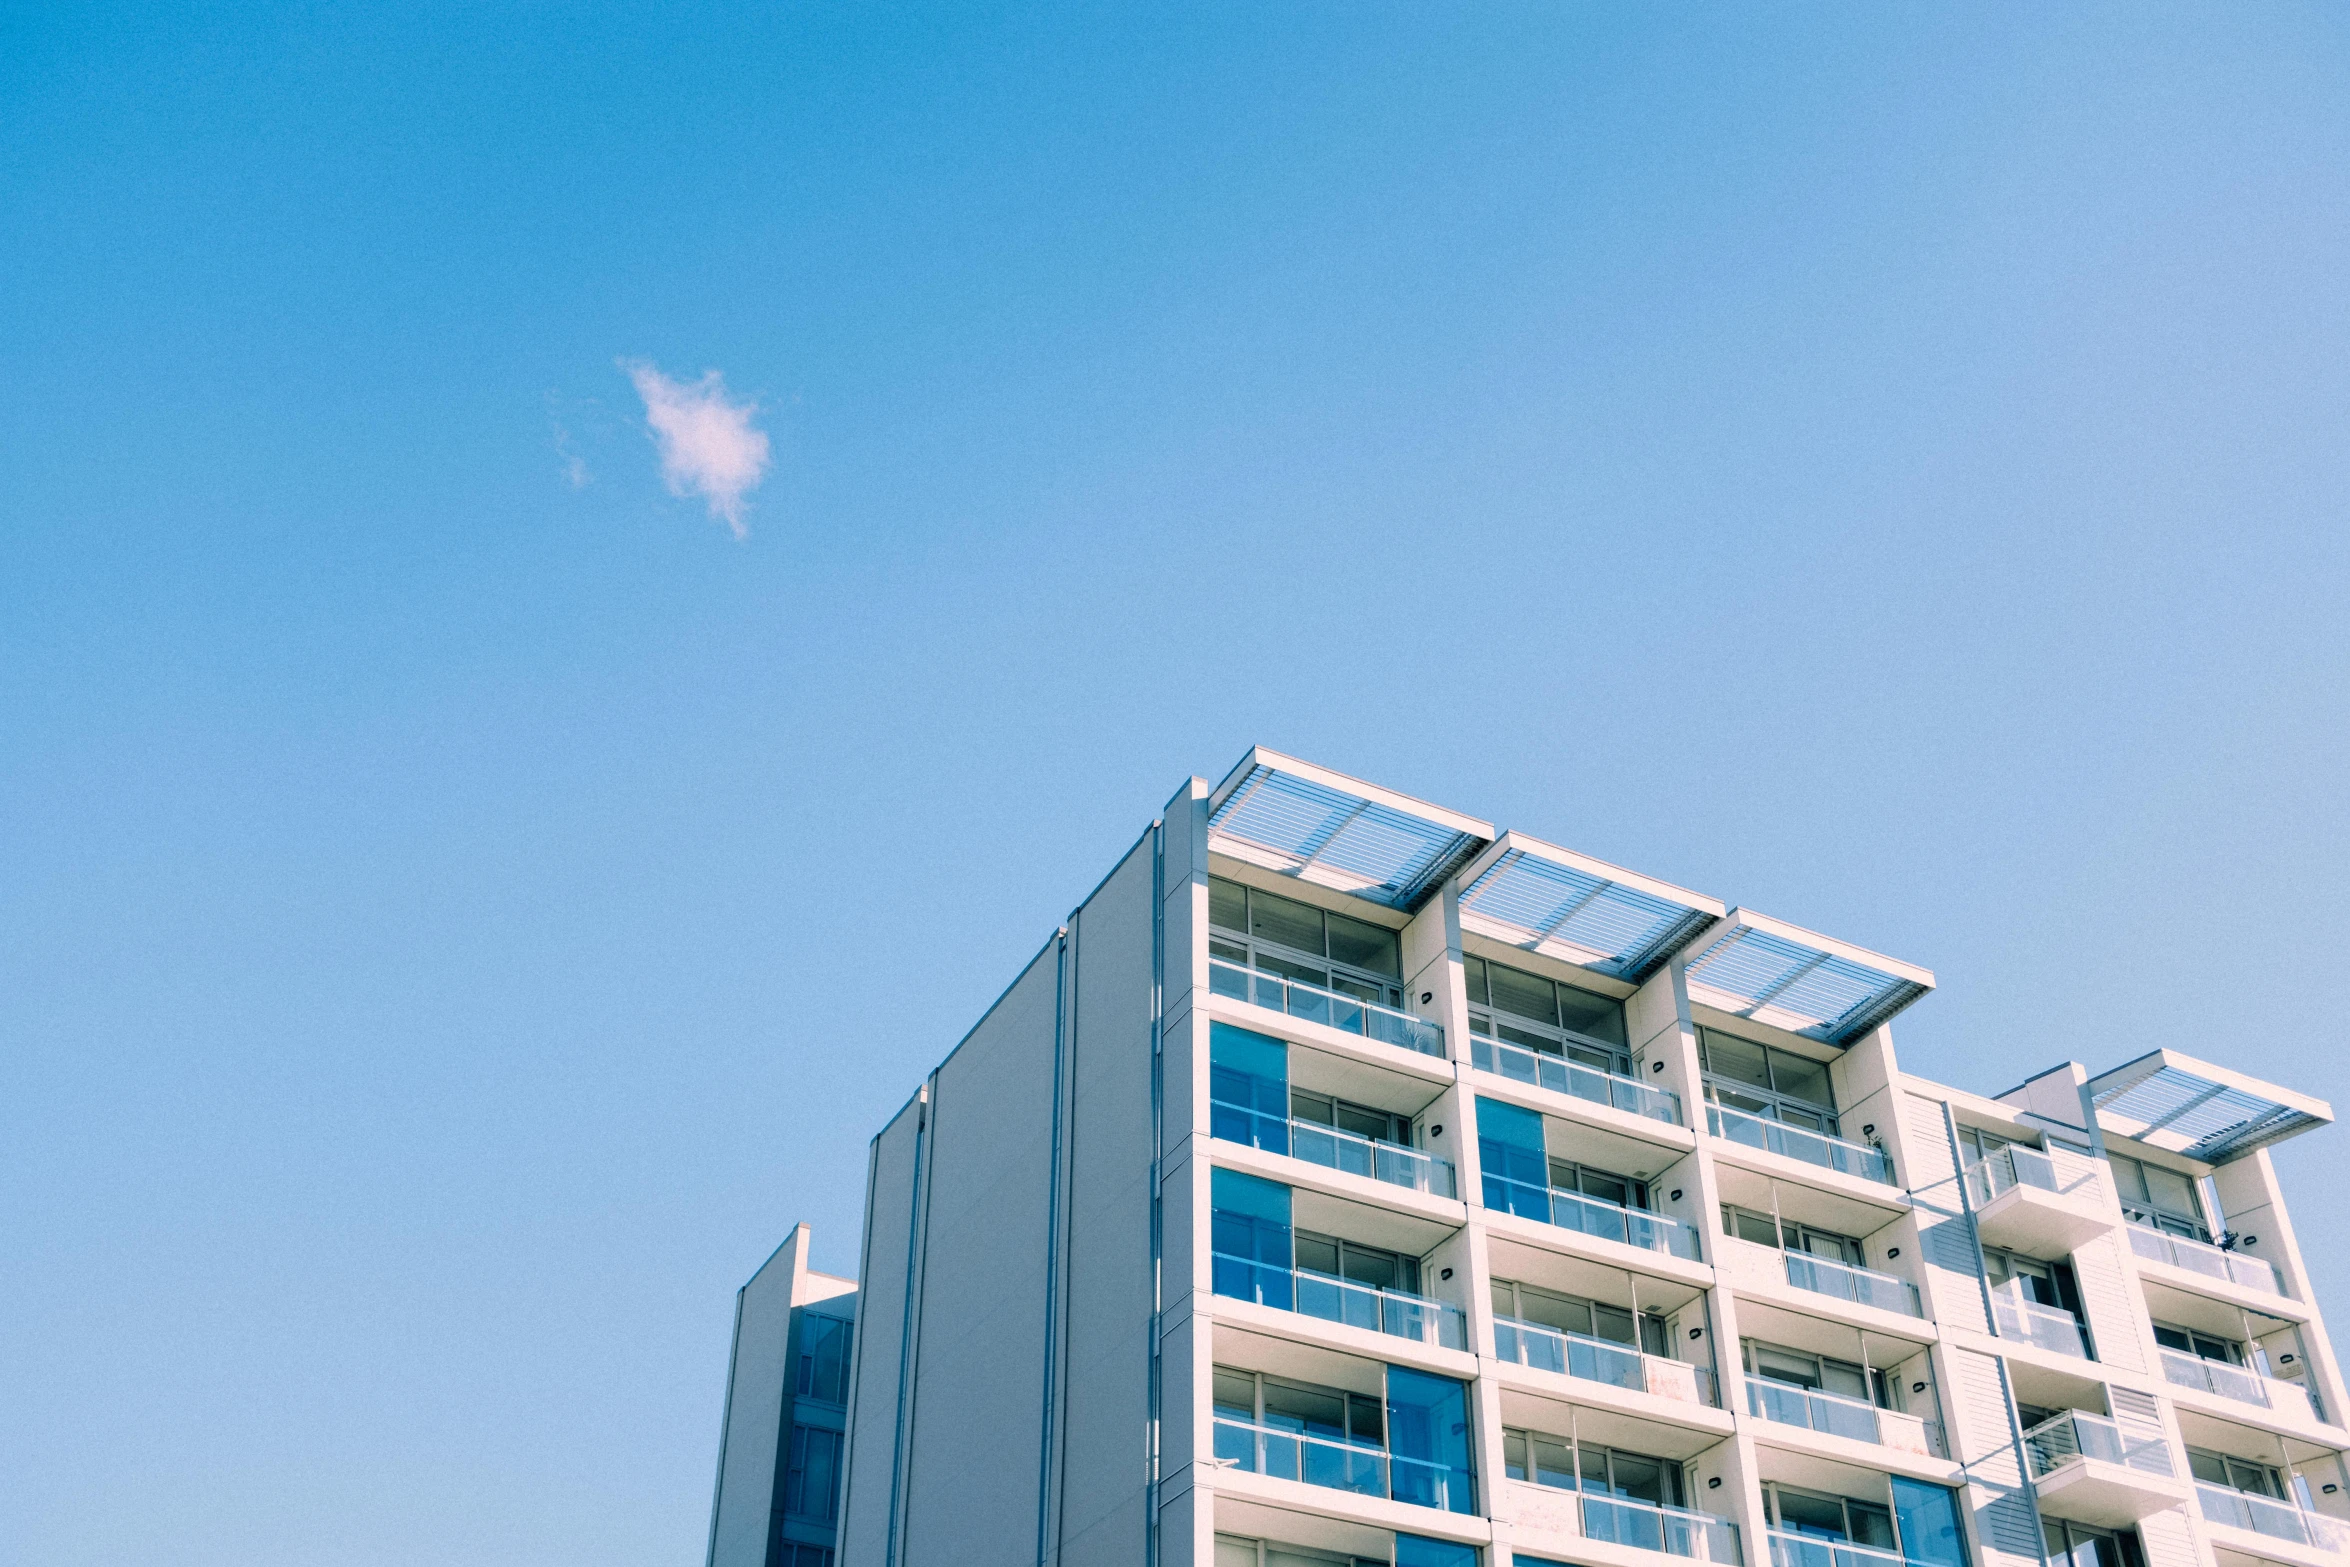 a tall building with balconies on top of it, by Lee Loughridge, unsplash, modernism, caulfield, cloudless sky, ignant, photo of breeze kaze